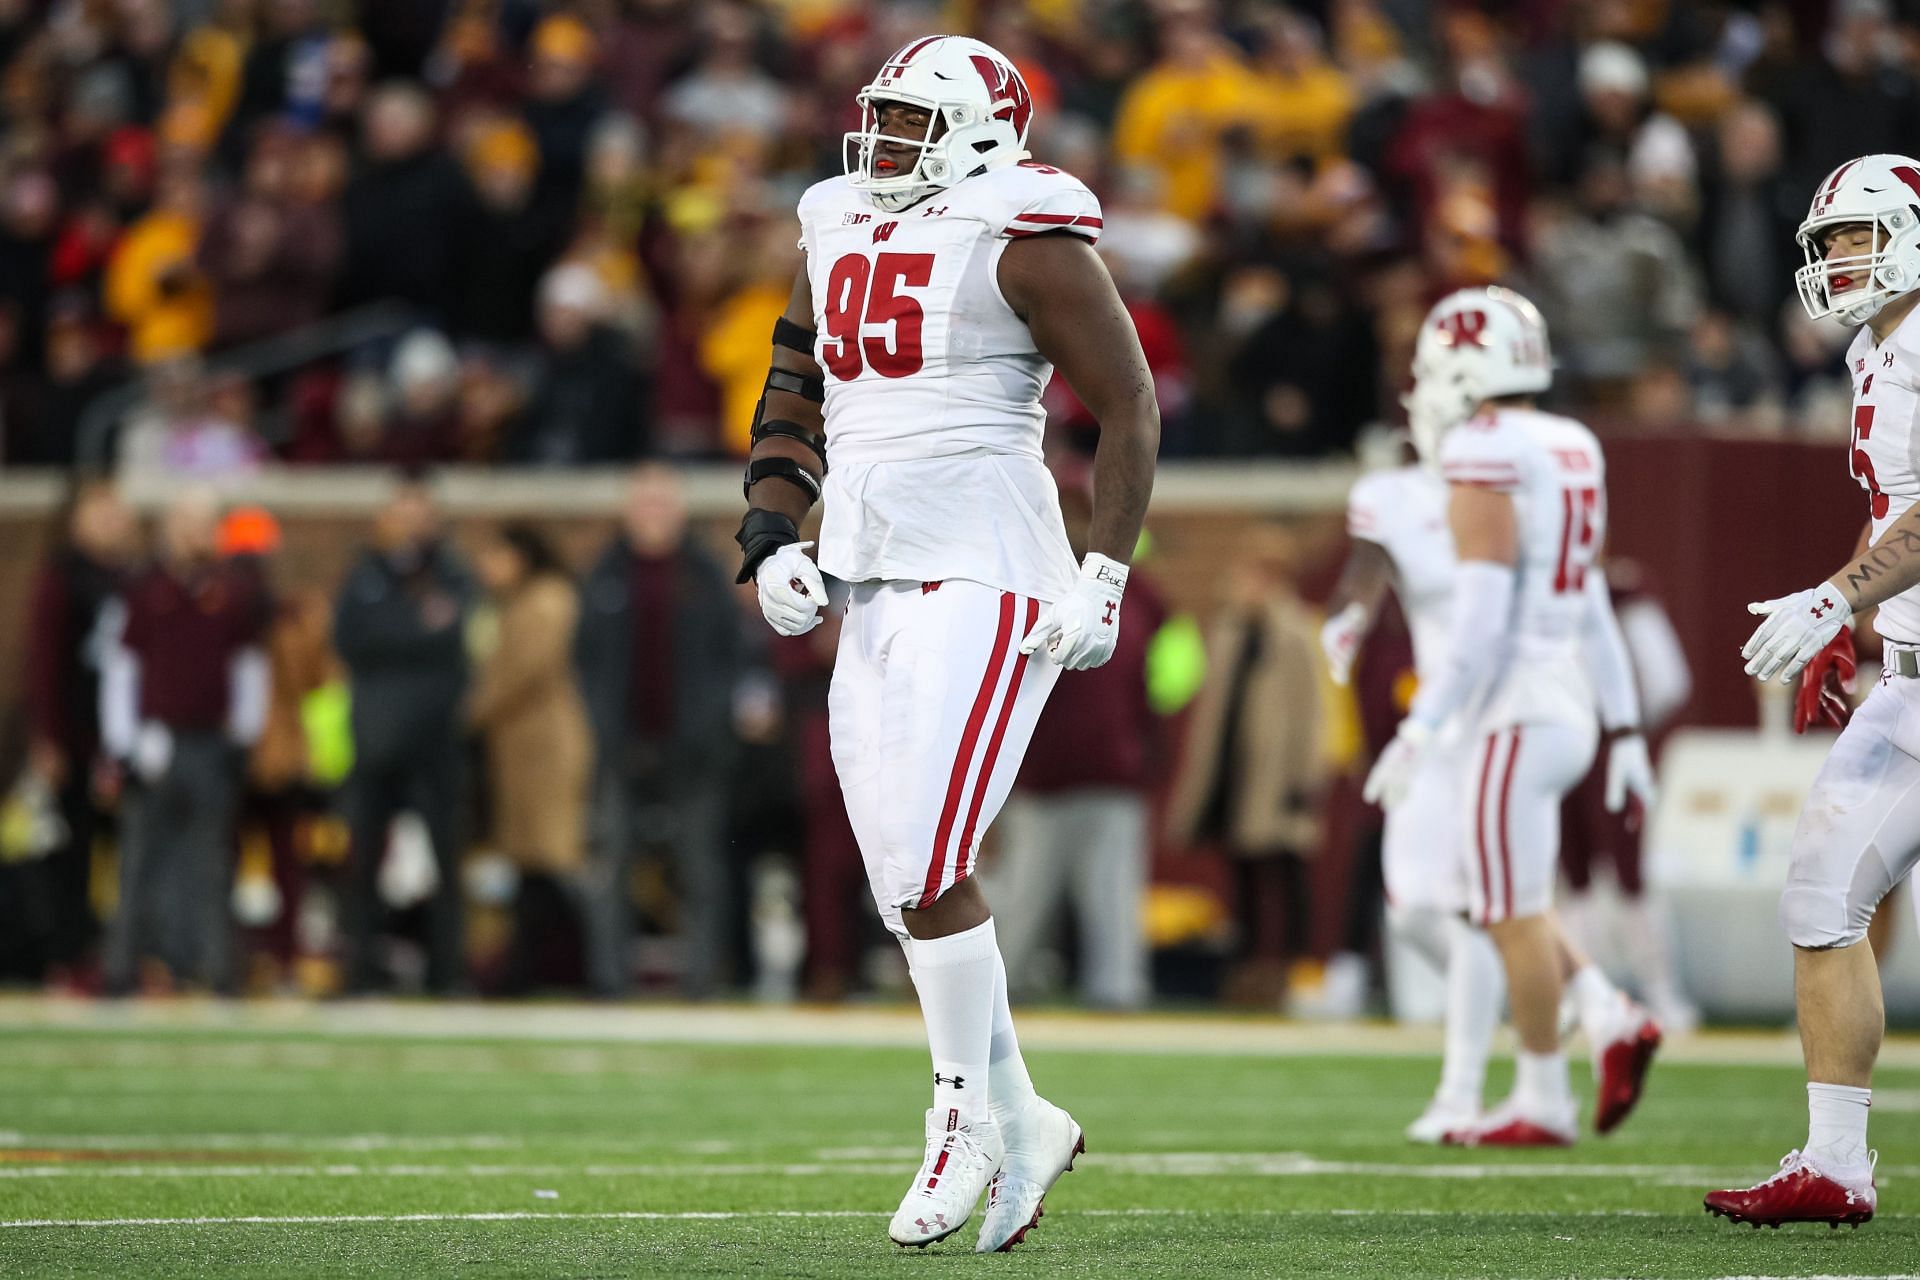 Keeanu Benton #95 of the Wisconsin Badgers celebrates after recording a sack against Tanner Morgan #2 of the Minnesota Golden Gophers